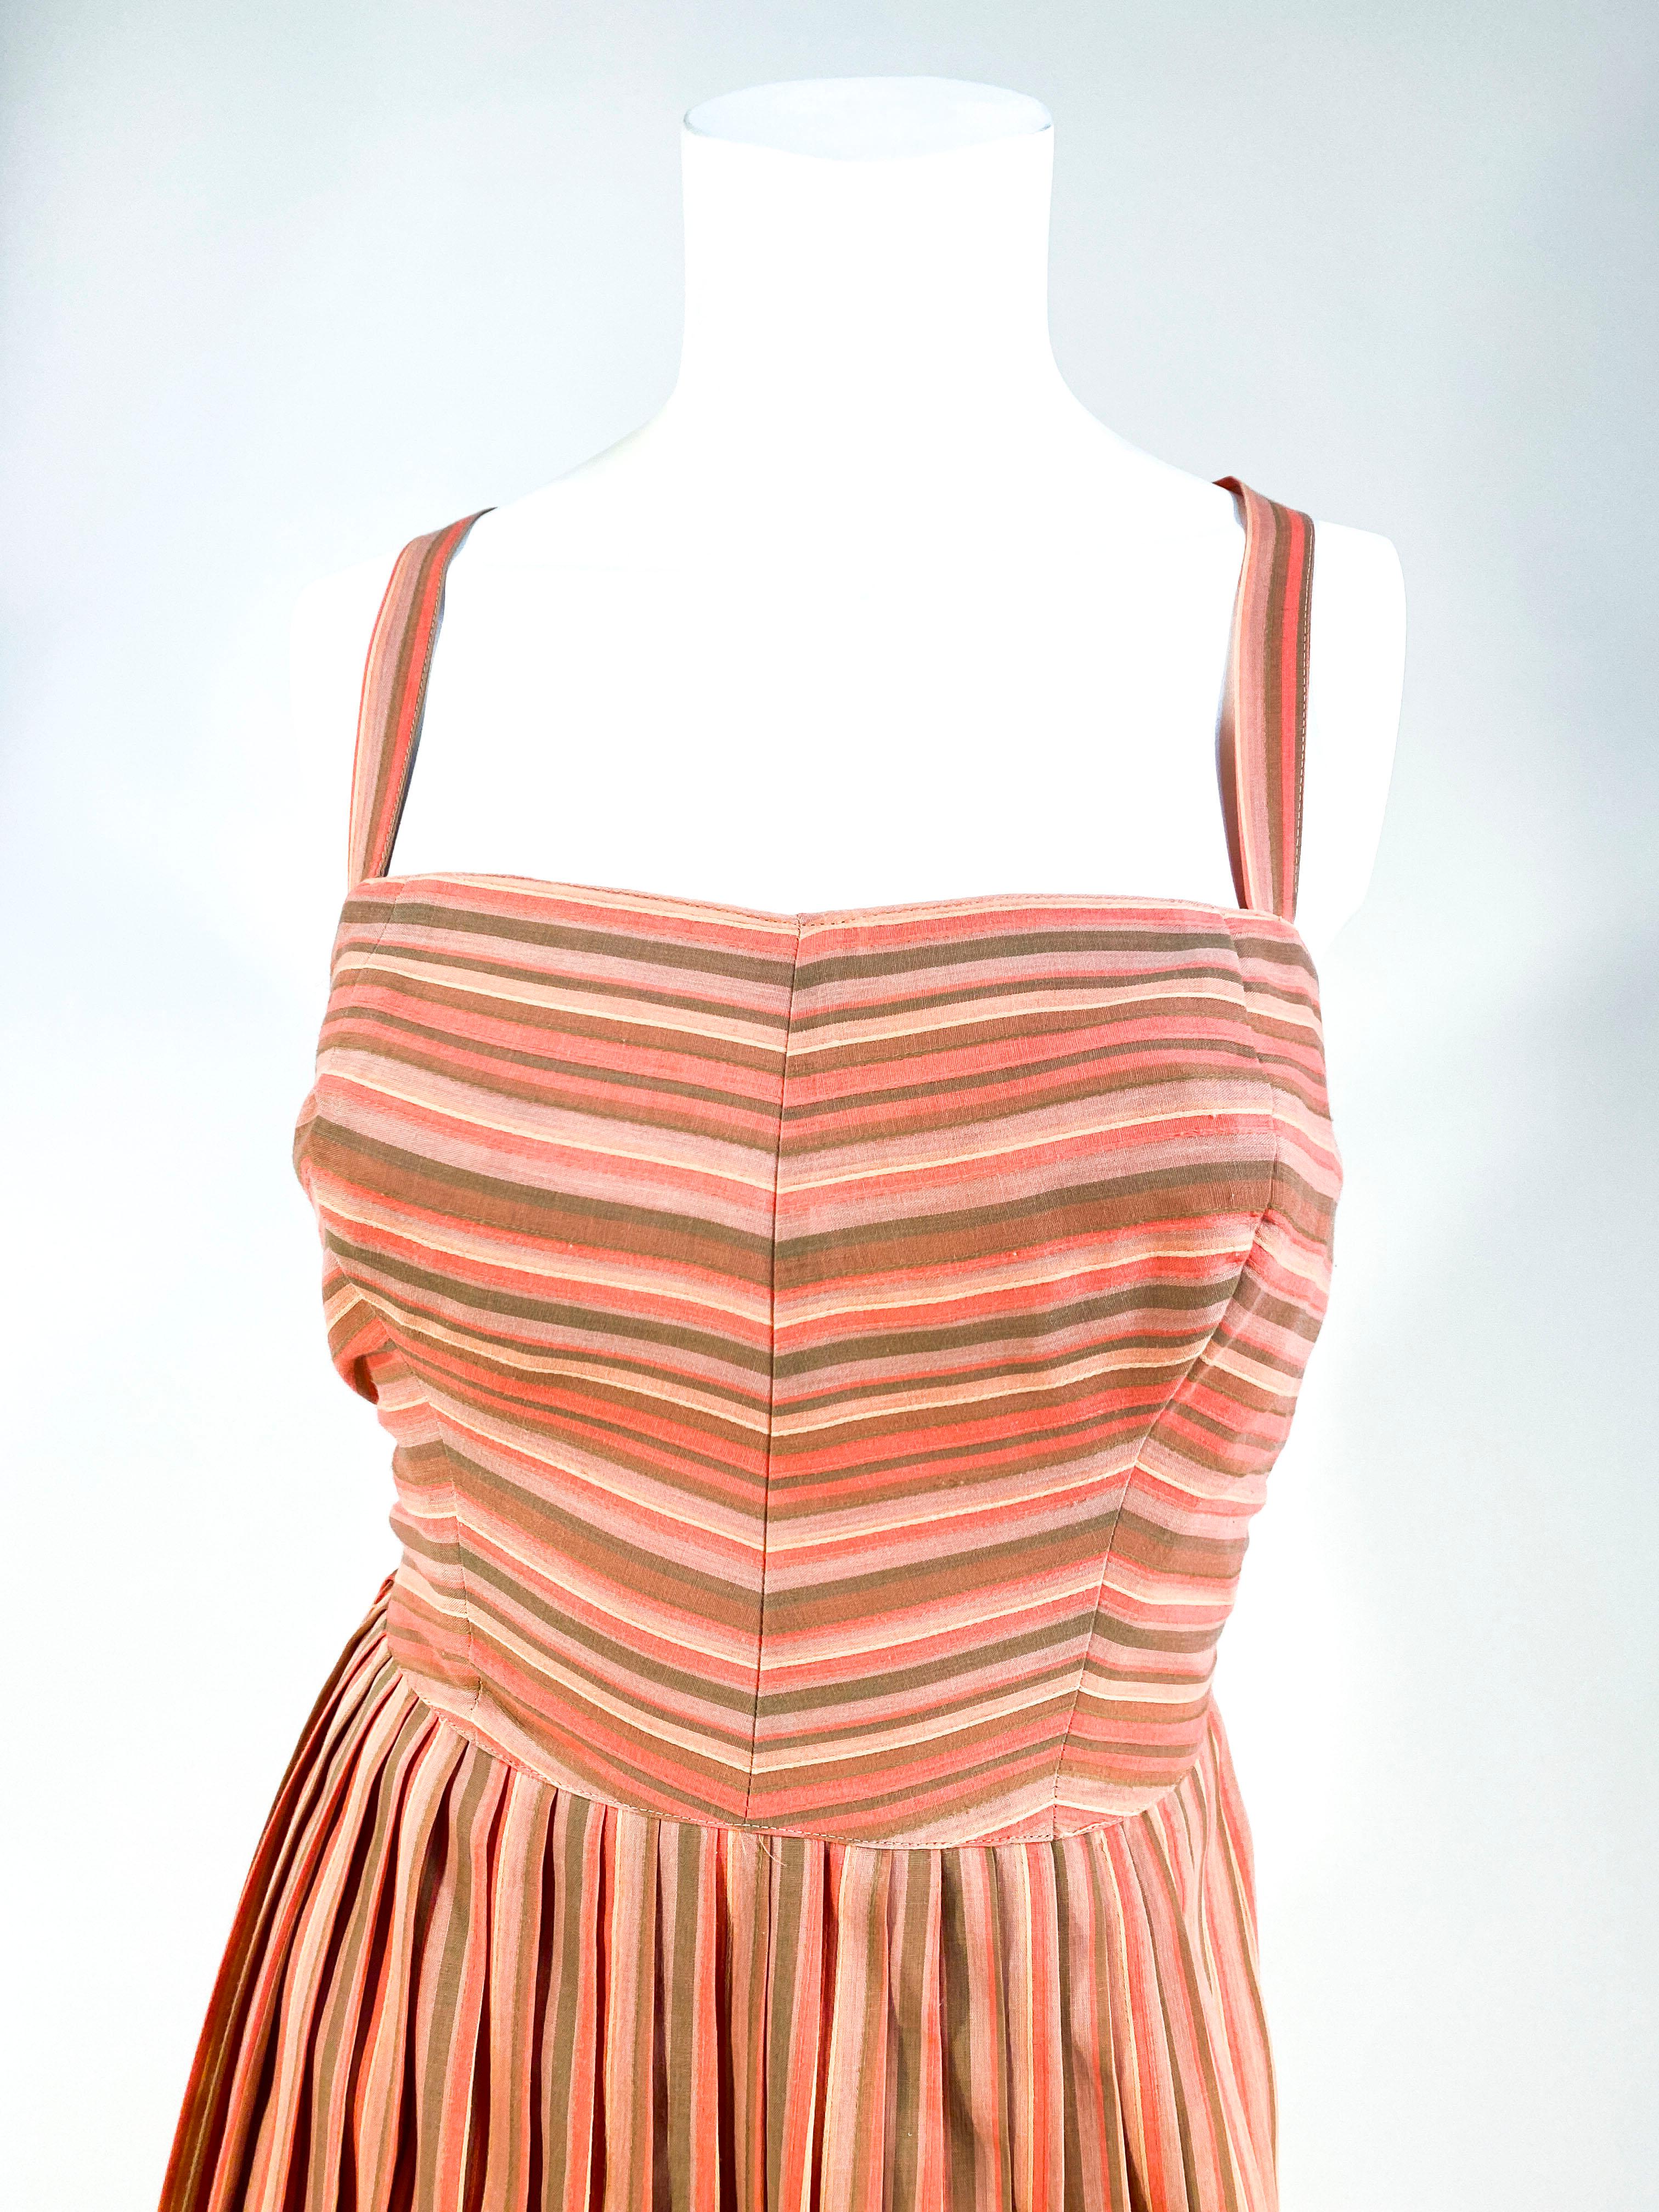 1950s cotton sunsuit featuring a narrow pattern-matched striped print (in soft cream, tan, peach and brown). The knife pleated overskirt hides the pantalettes with elastic leg openings. The straps are buttoned and are adjustable also the ruched back